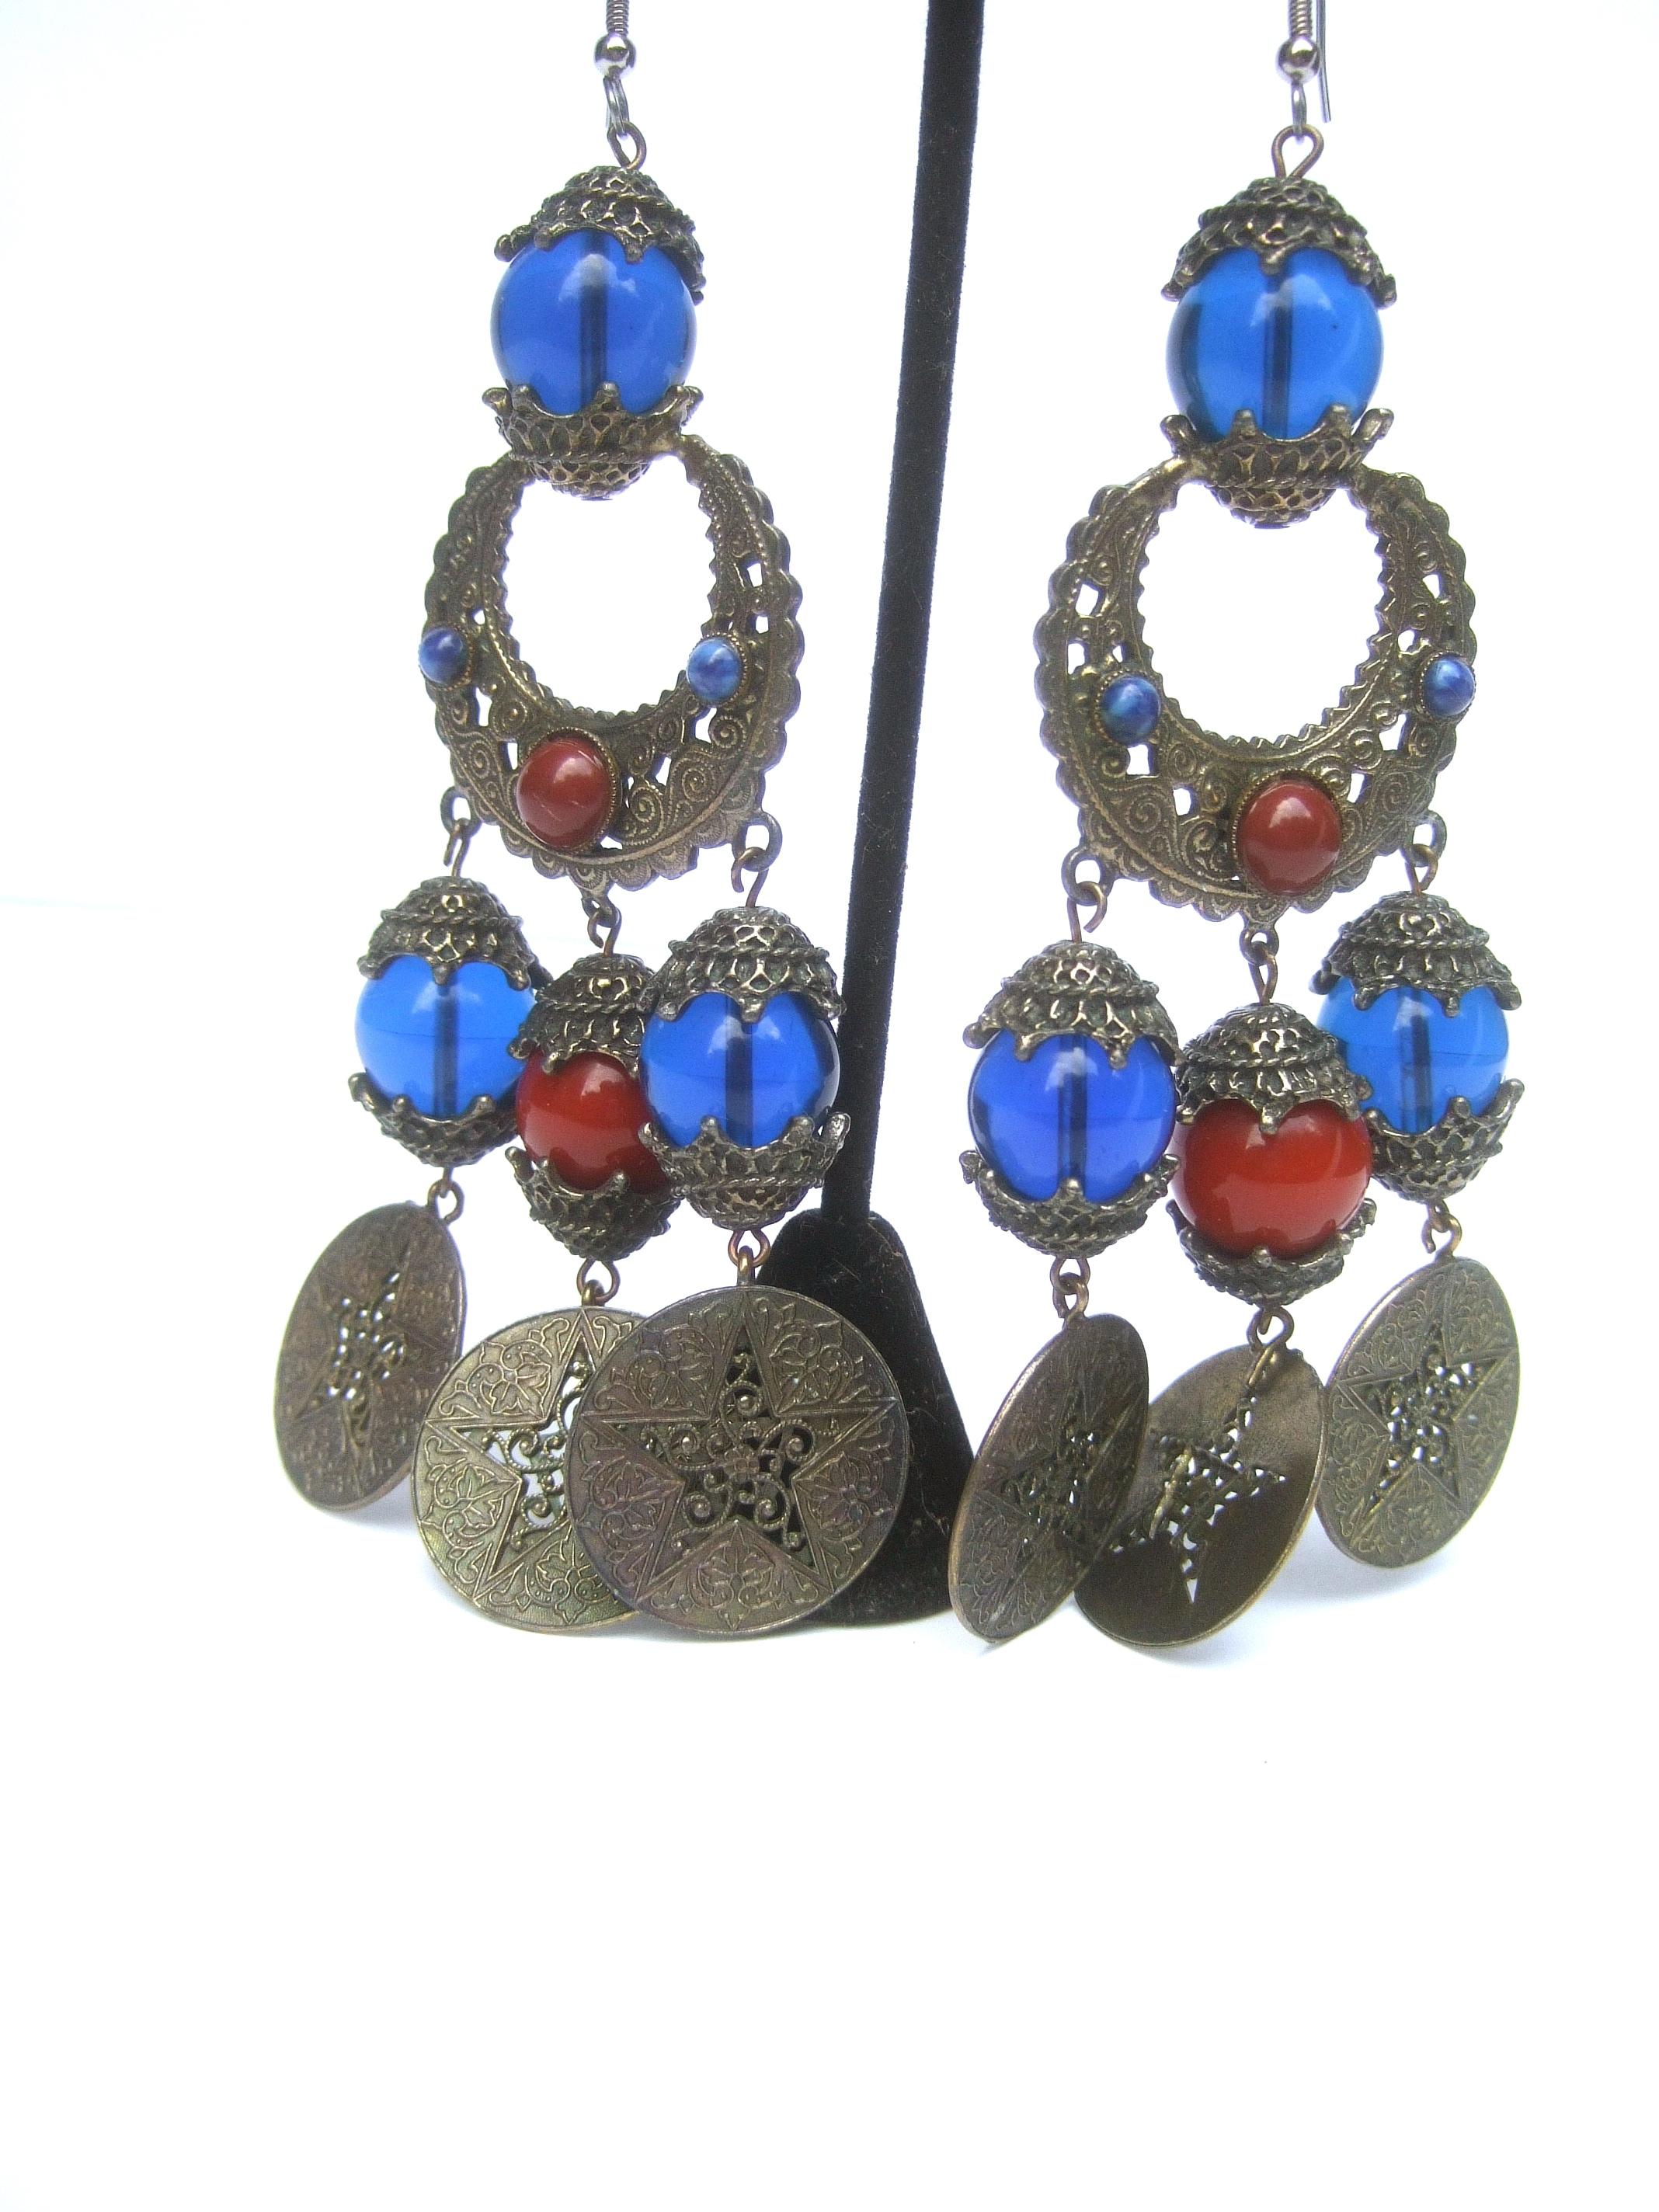 Alexis Kirk Massive Etruscan style glass beaded dangling charm statement earrings c 1970s
The ornate burnished brass metal designer pierced runway mogul style earrings 
are embellished with glass beads in translucent cobalt blue color glass beads